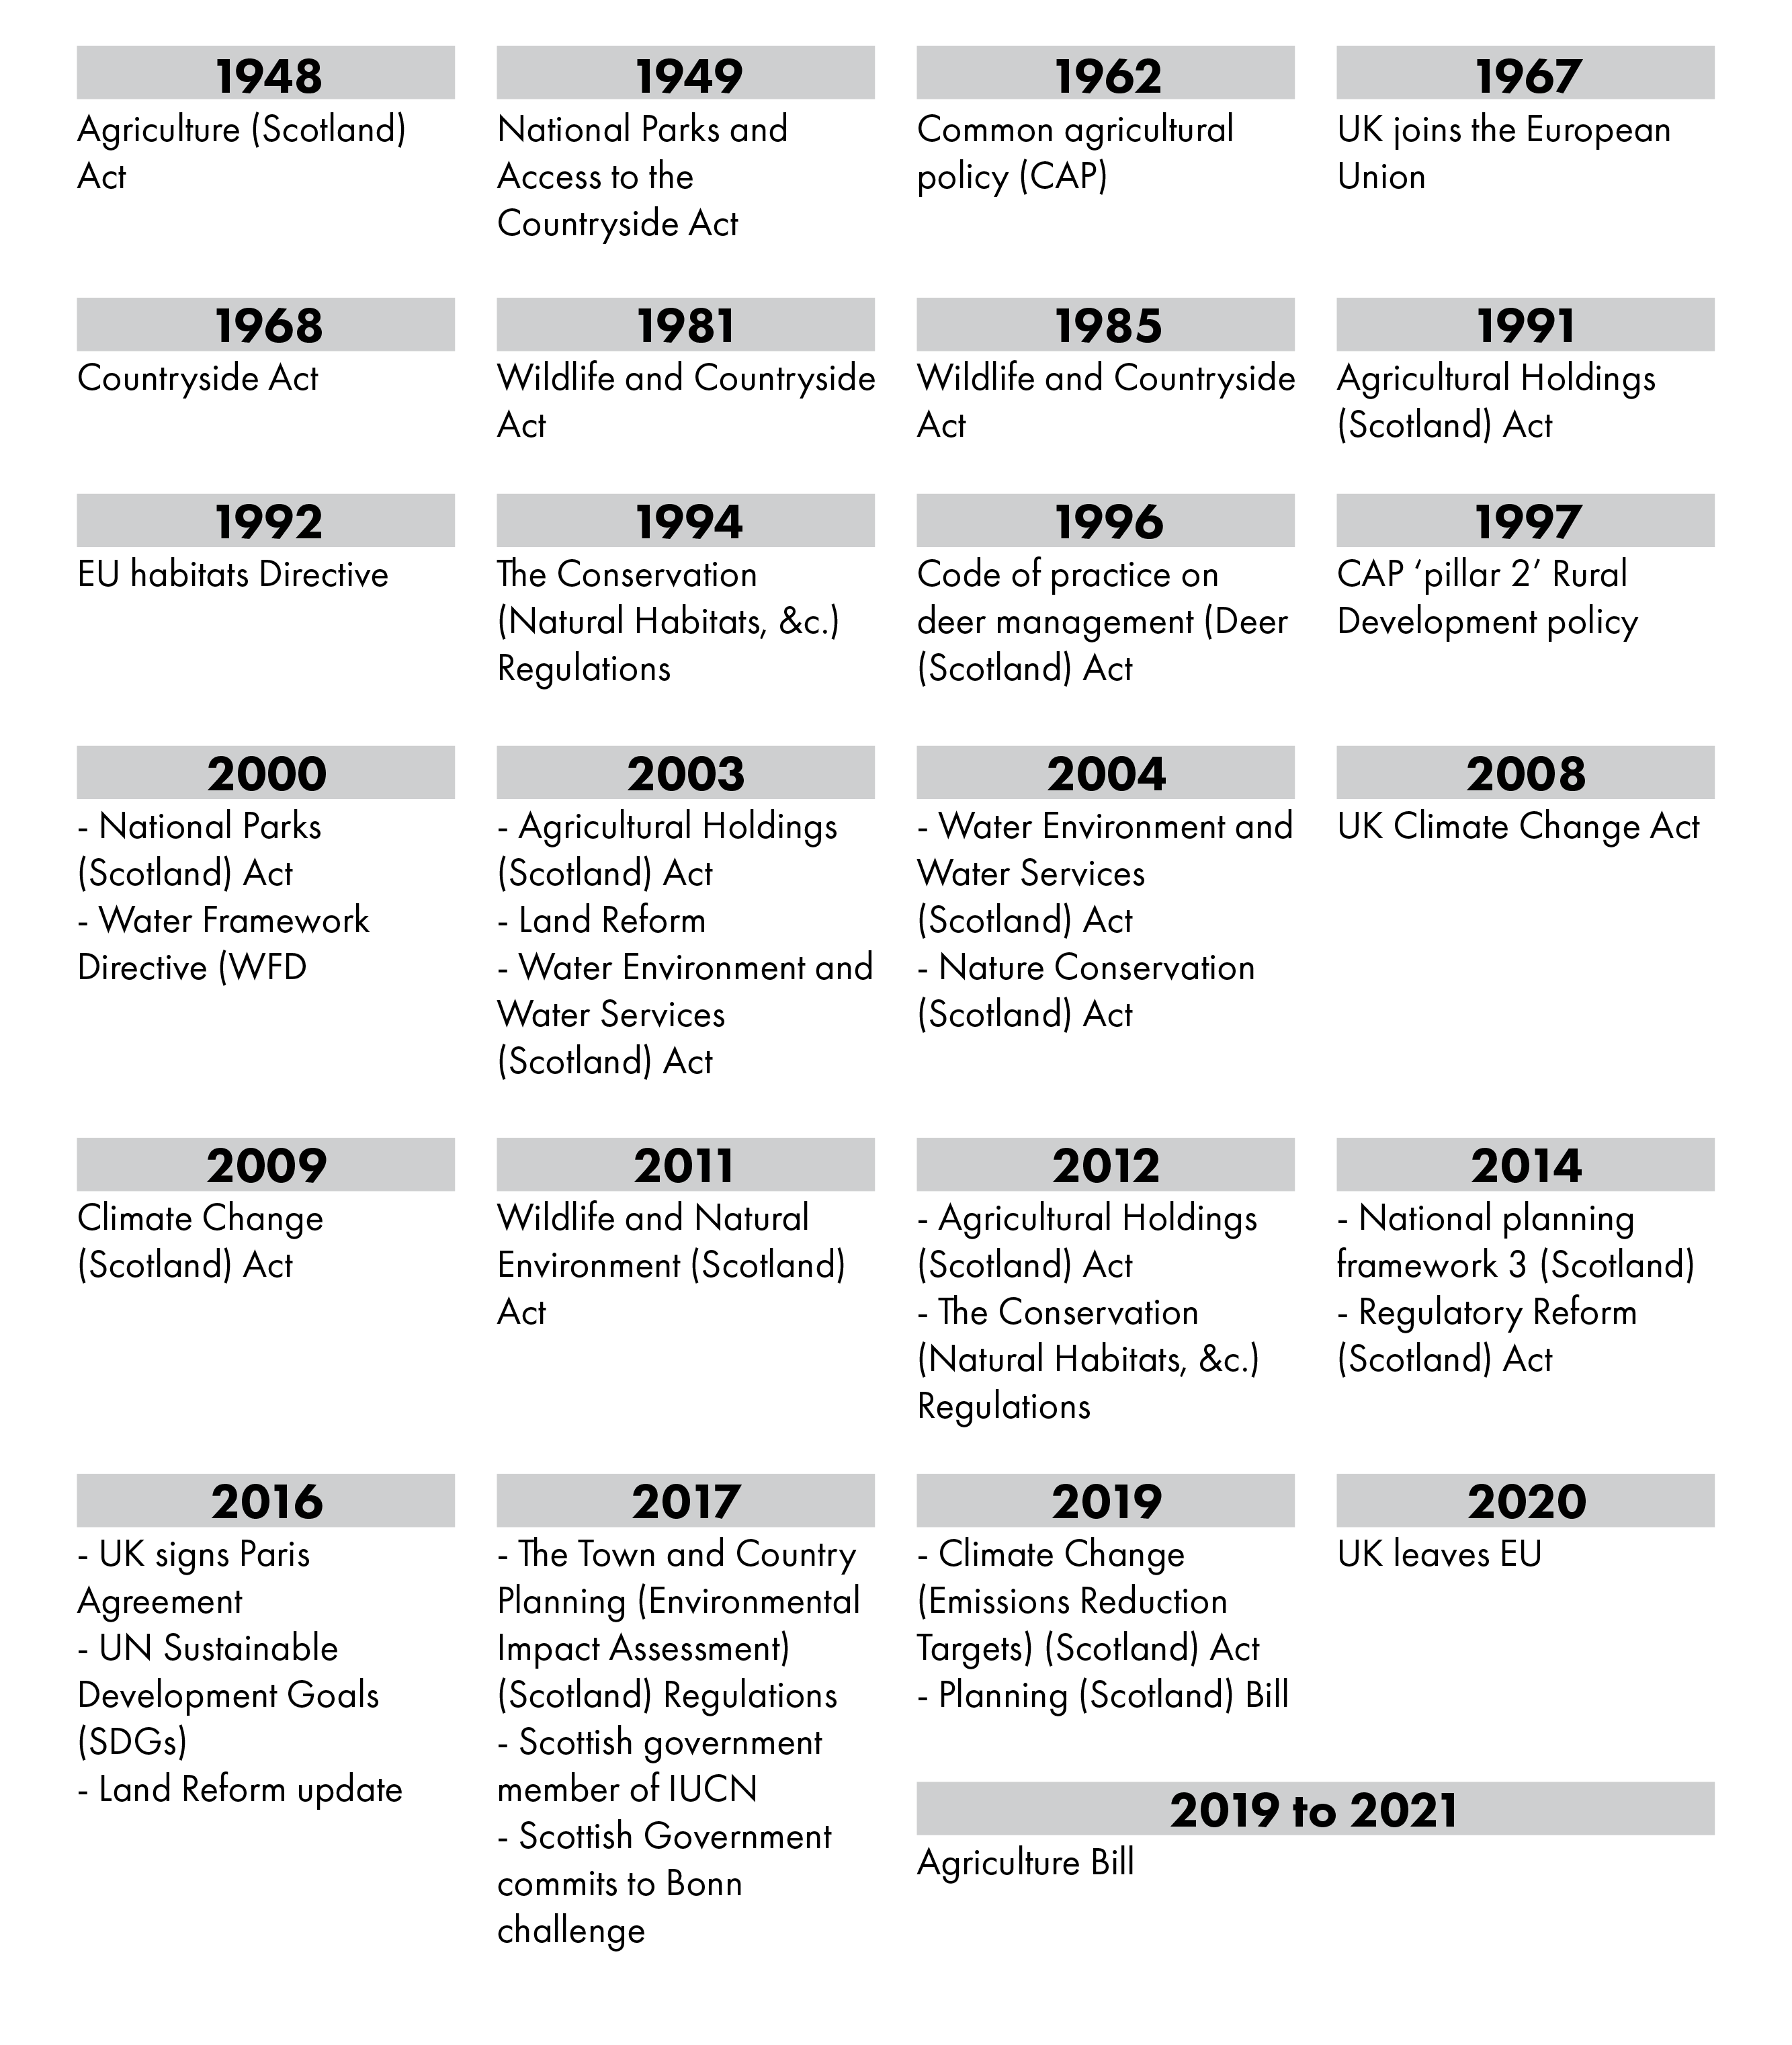  Key policies, Acts and strategies that have occurred since 1948